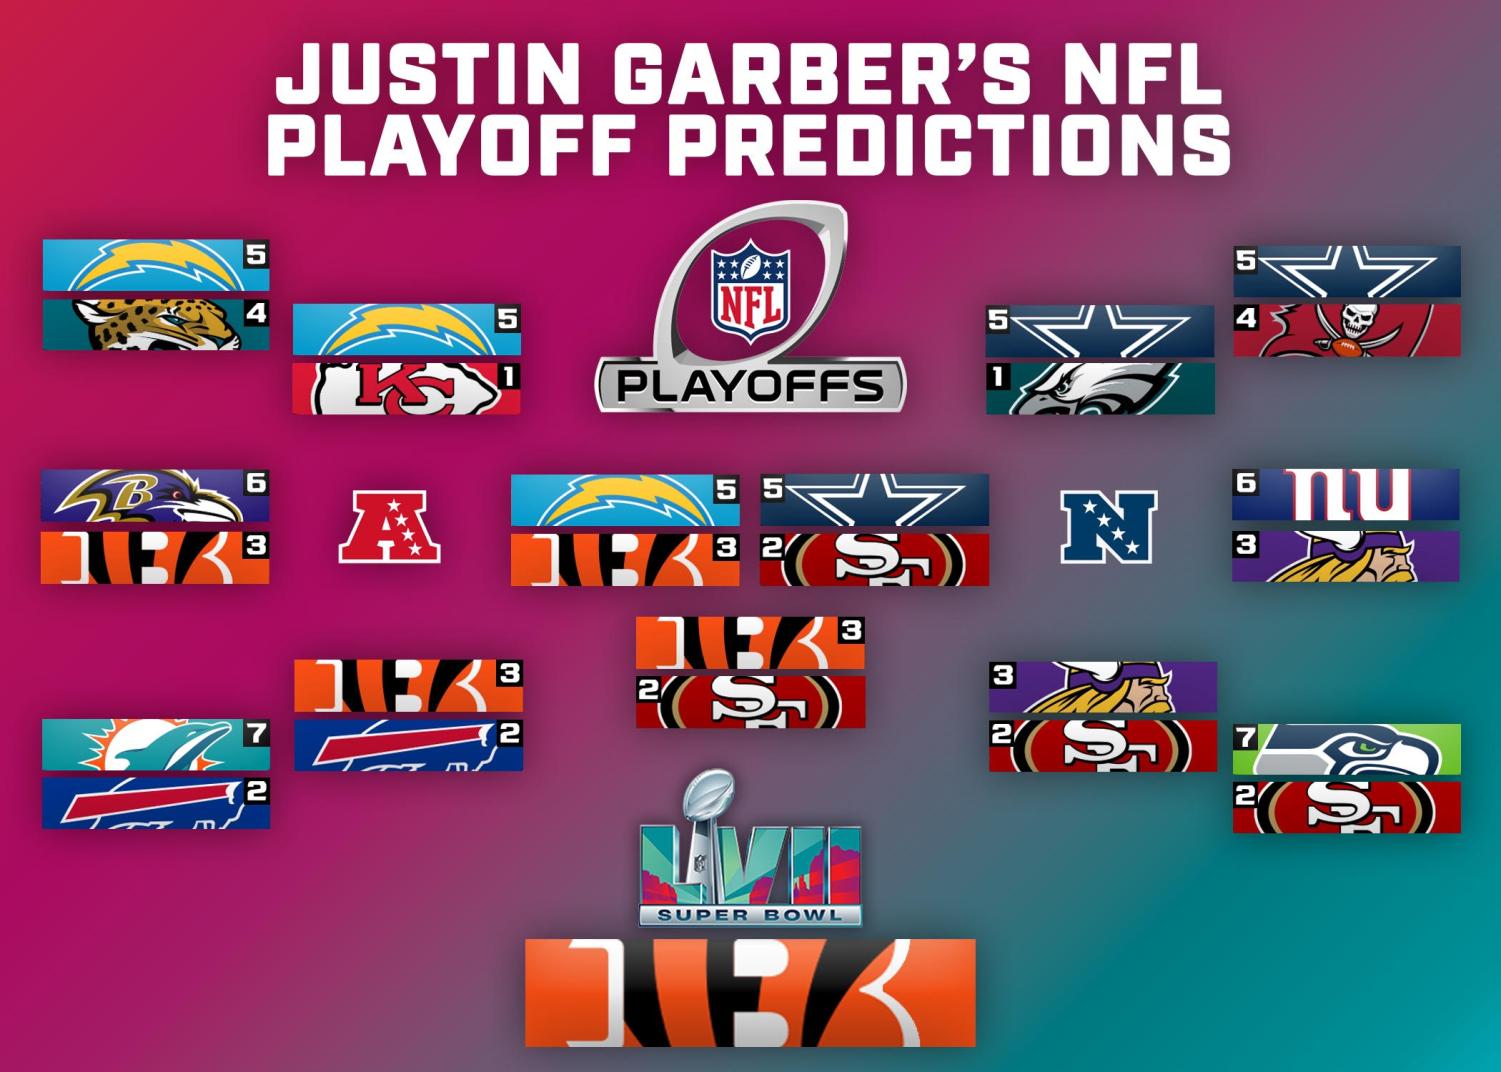 playoff predictions this weekend